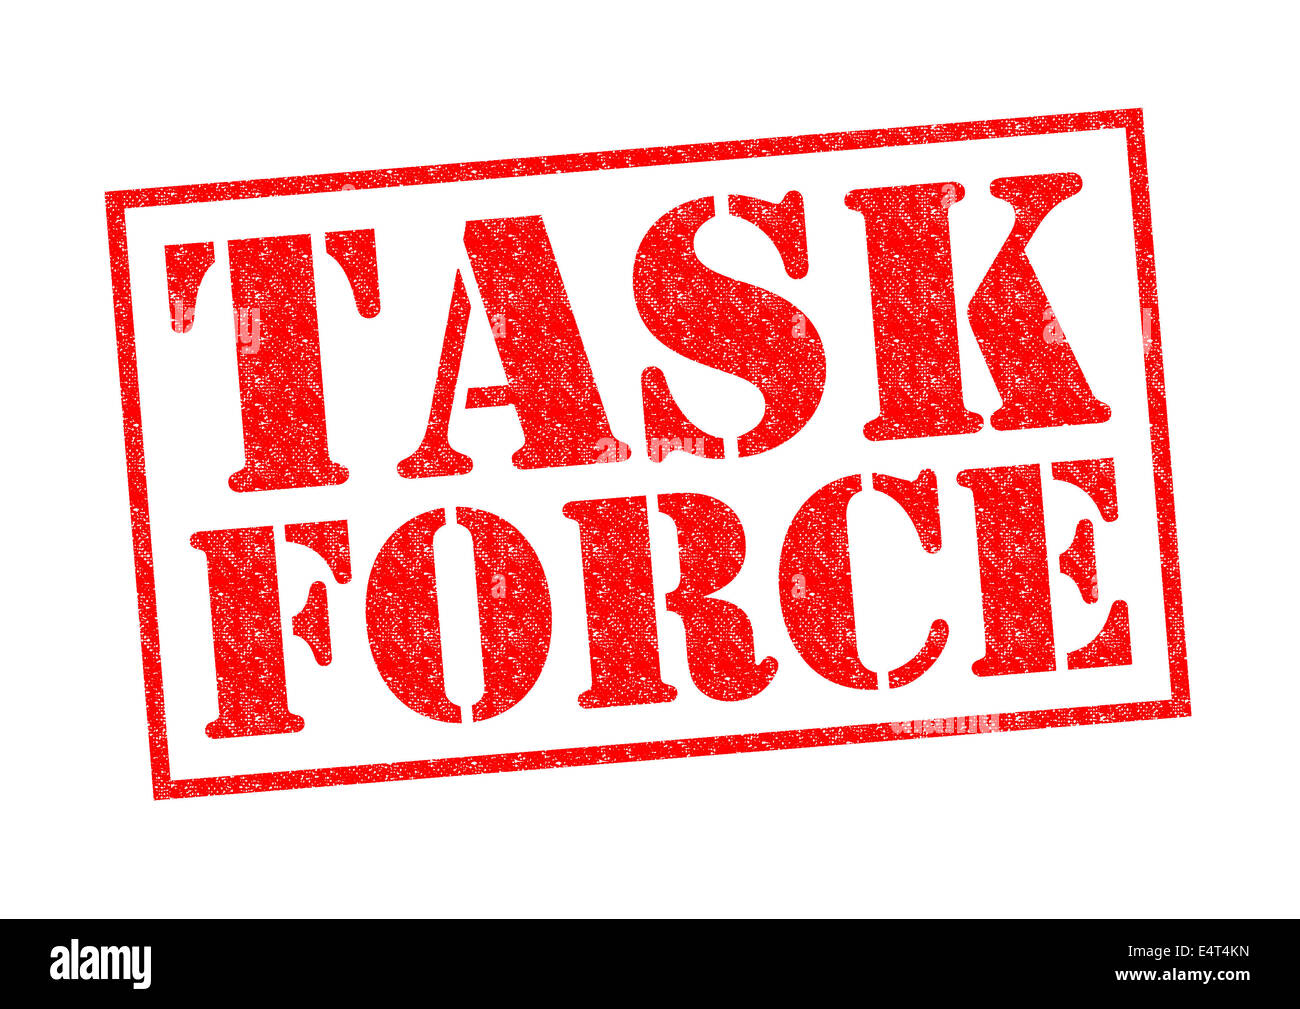 TASK FORCE red Rubber Stamp over a white background. Stock Photo